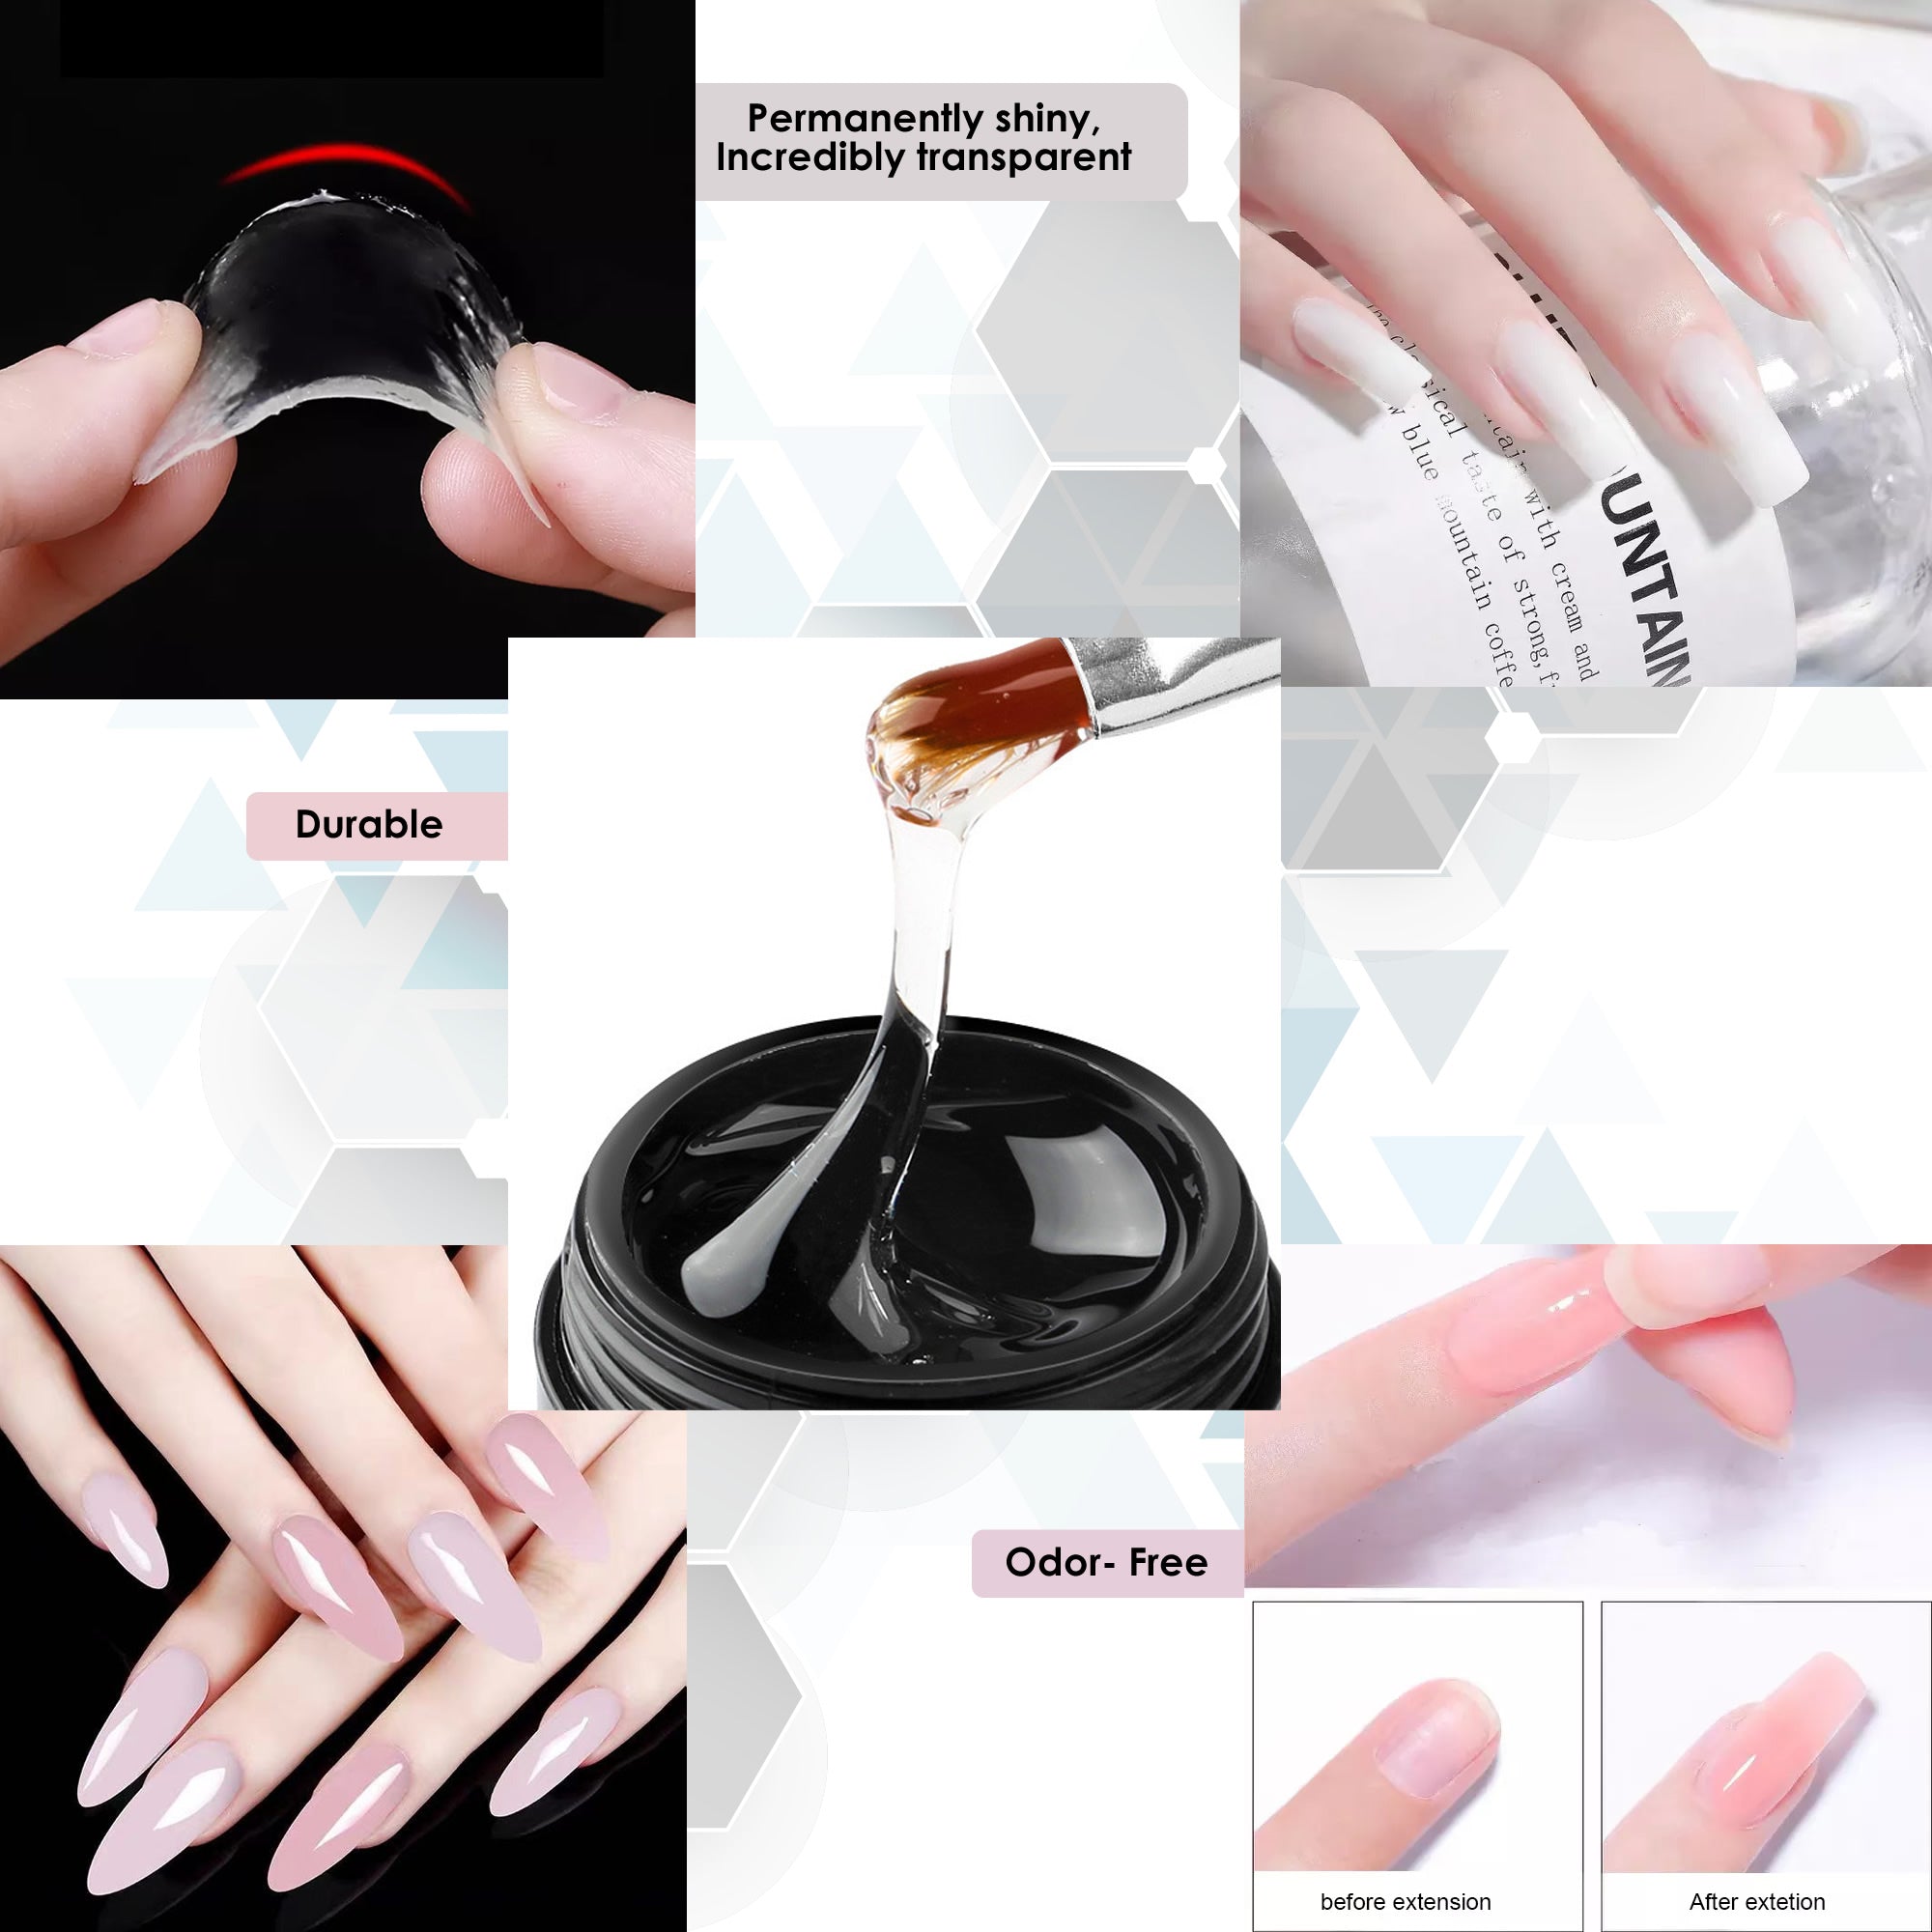 15ml Thermal Quick Building Uv Gel Acrylic Poly Extension Gel Nail Tips Uv  Builder Soak Off Nail Art, Rs 1299.00 | ID: 25871773812